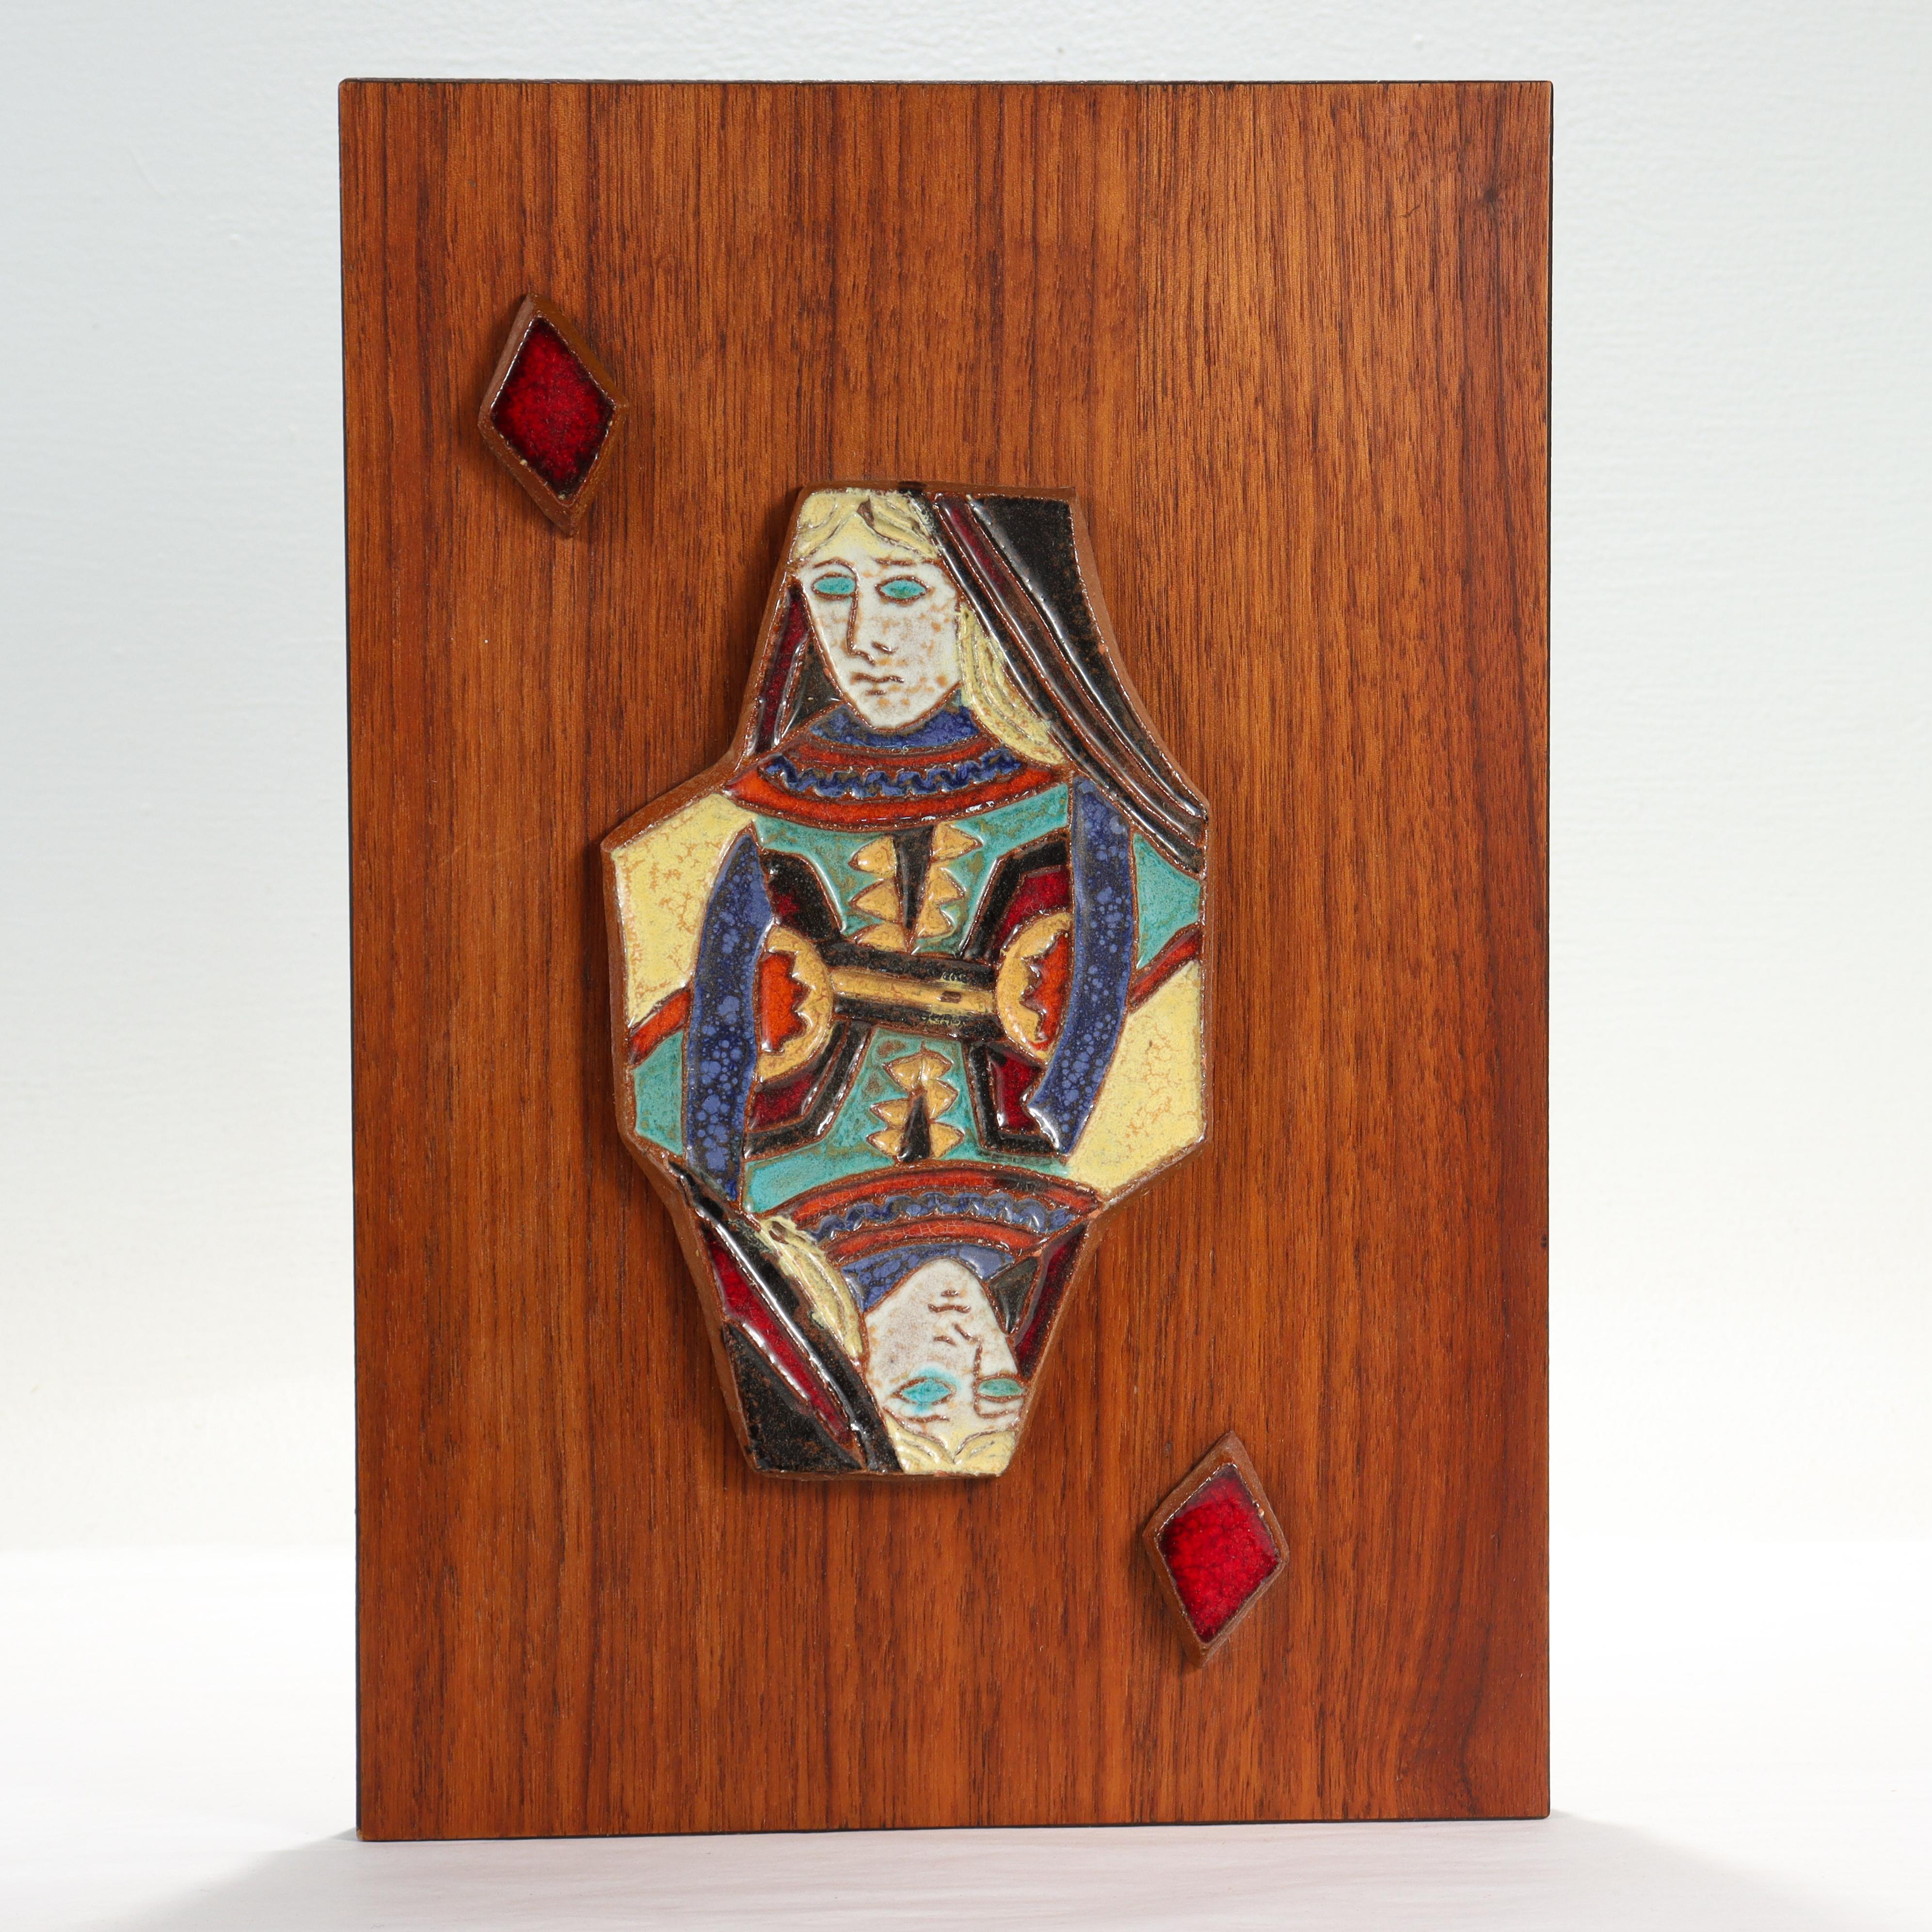 A fine Mid-Century Modern pottery tile.

By Harris Strong. 

With a terracotta pottery tile depicting the Queen of Diamonds mounted on a teak veneered panel.

Simply a great tile for any fan of card games!

Date:
Mid-20th century

Overall